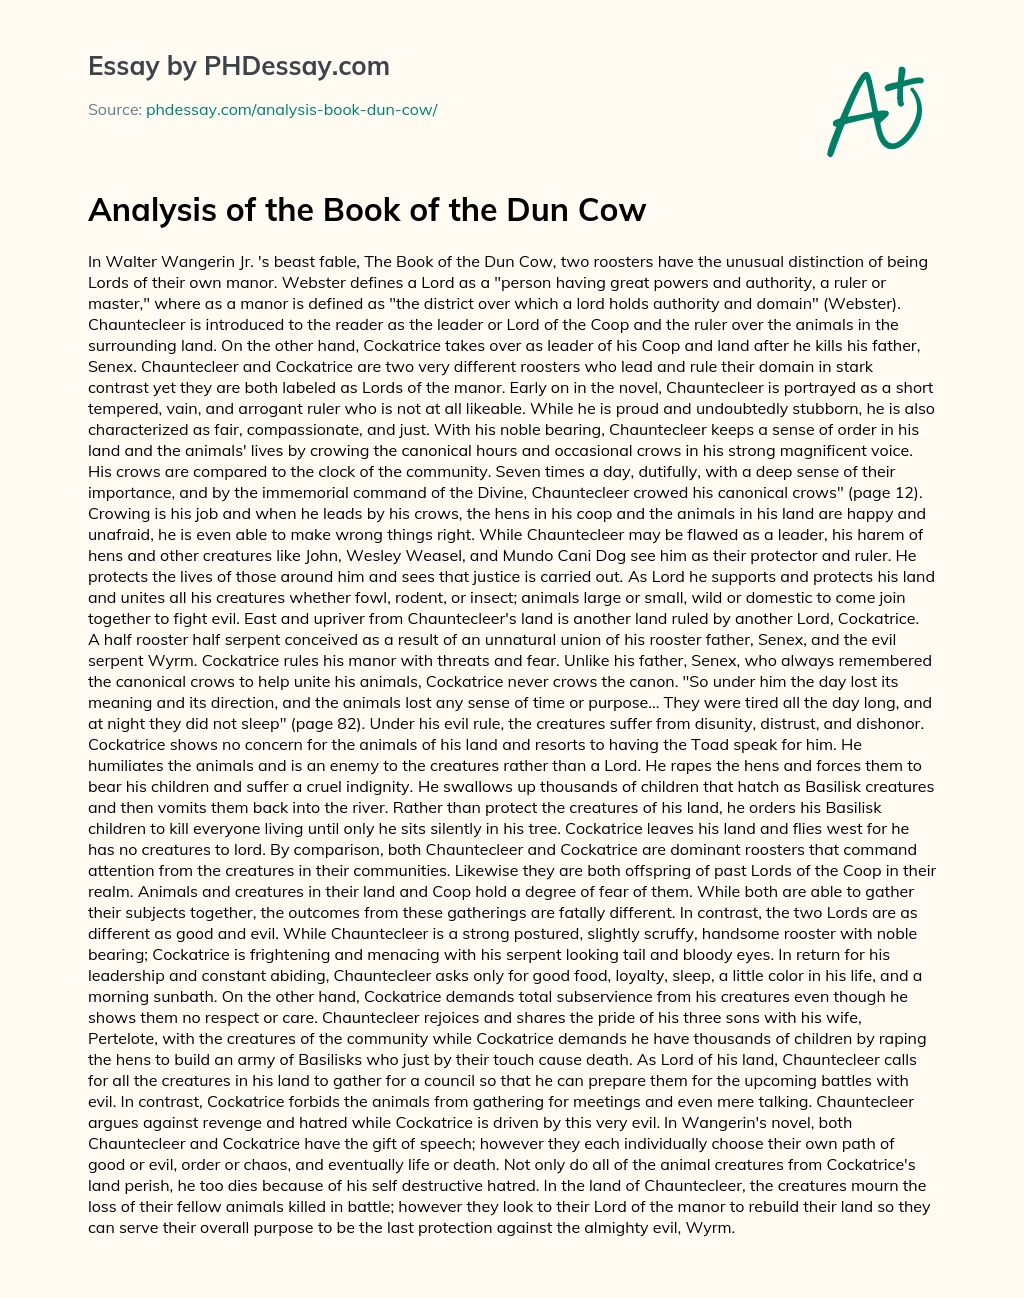 Analysis of the Book of the Dun Cow essay